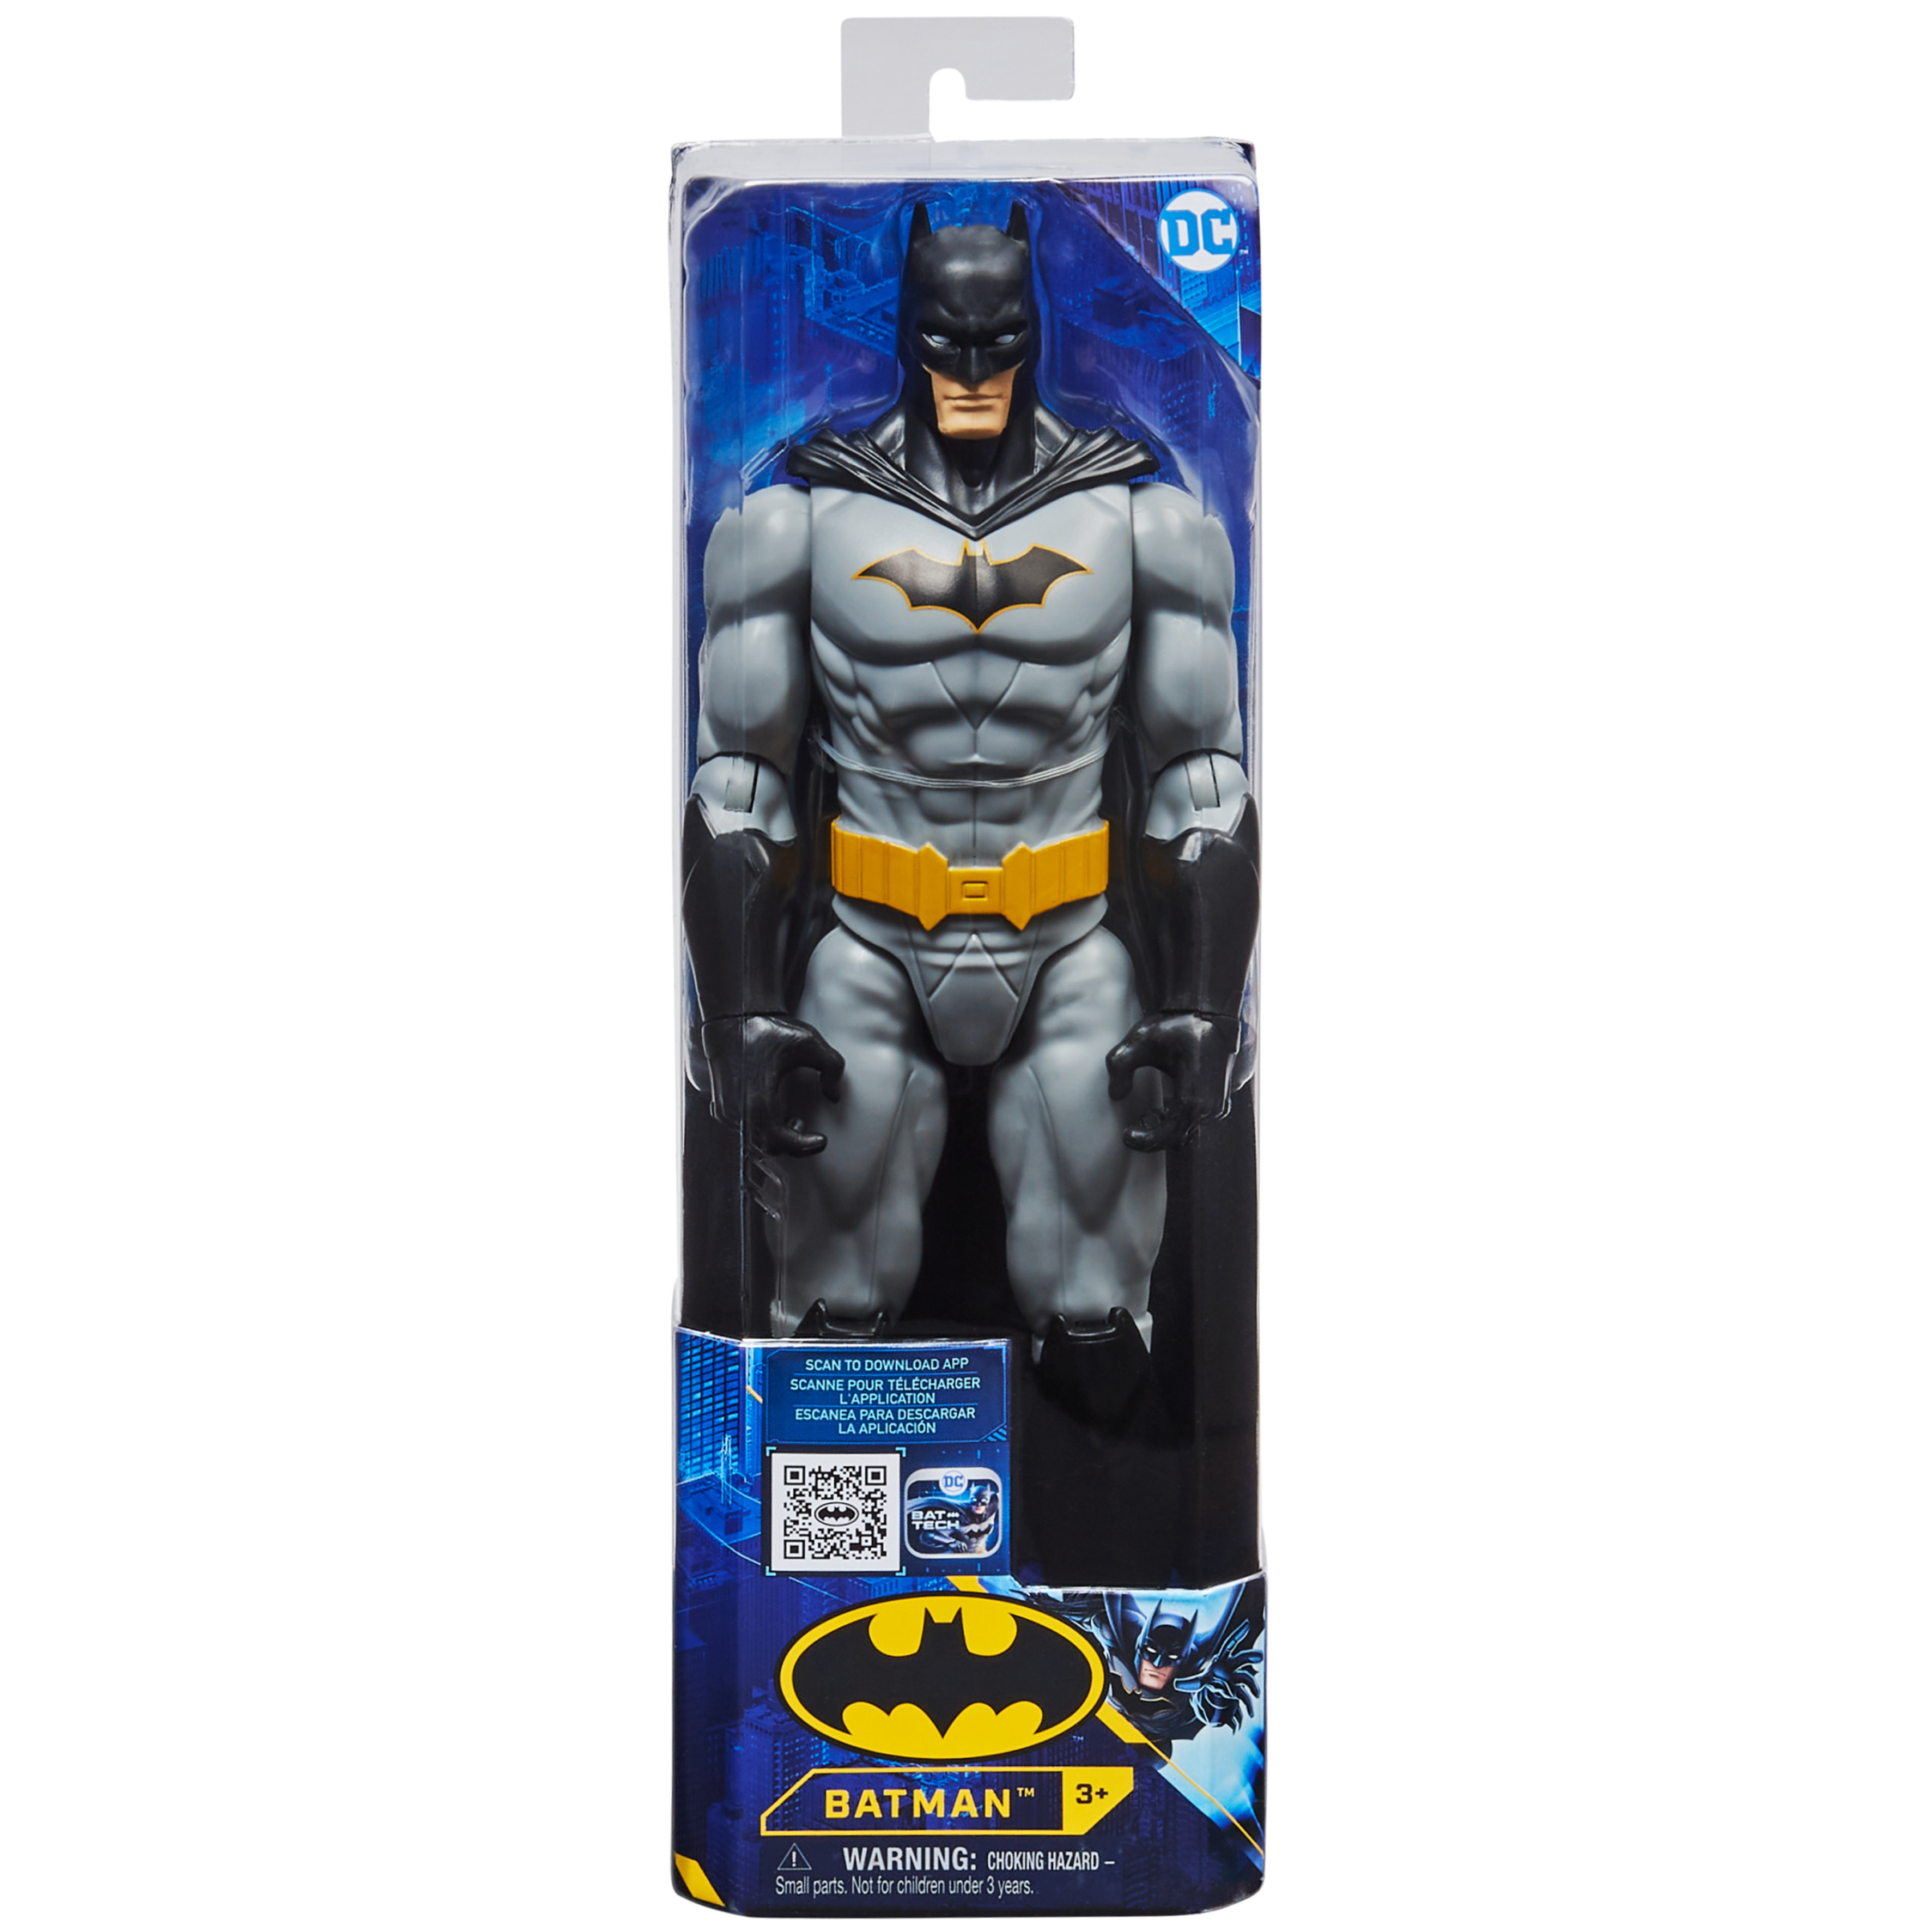 Batman 12-inch Rebirth Action Figure, Kids Toys for Boys Aged 3 and up - image 2 of 7